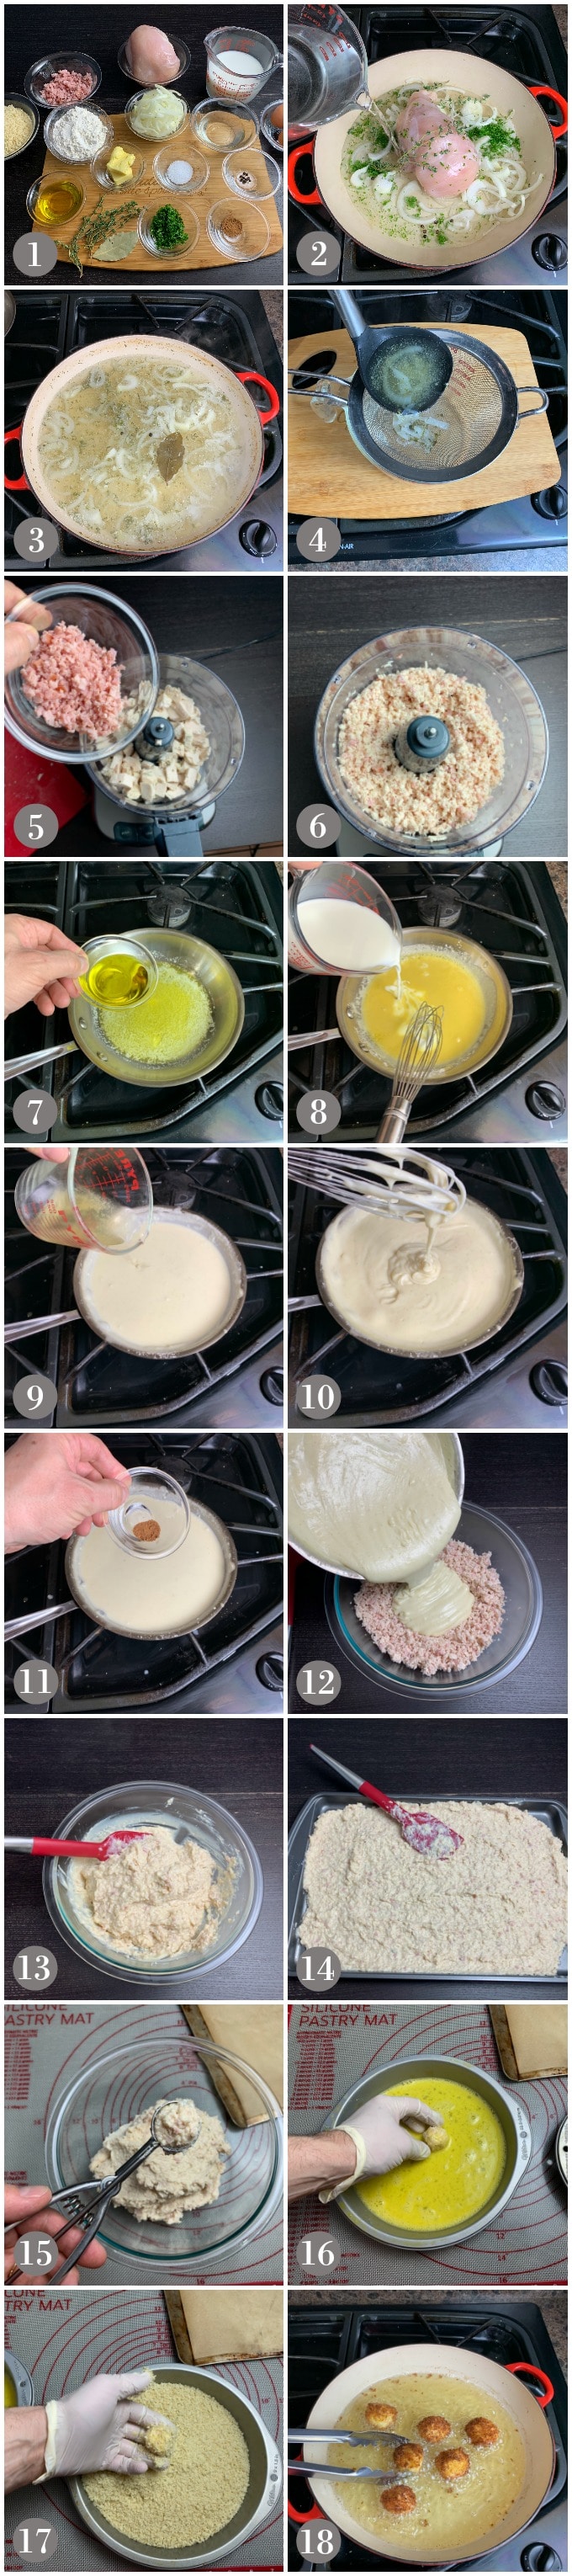 A collage of photos showing the steps to make ham and chicken croquettes in a pan and then frying.